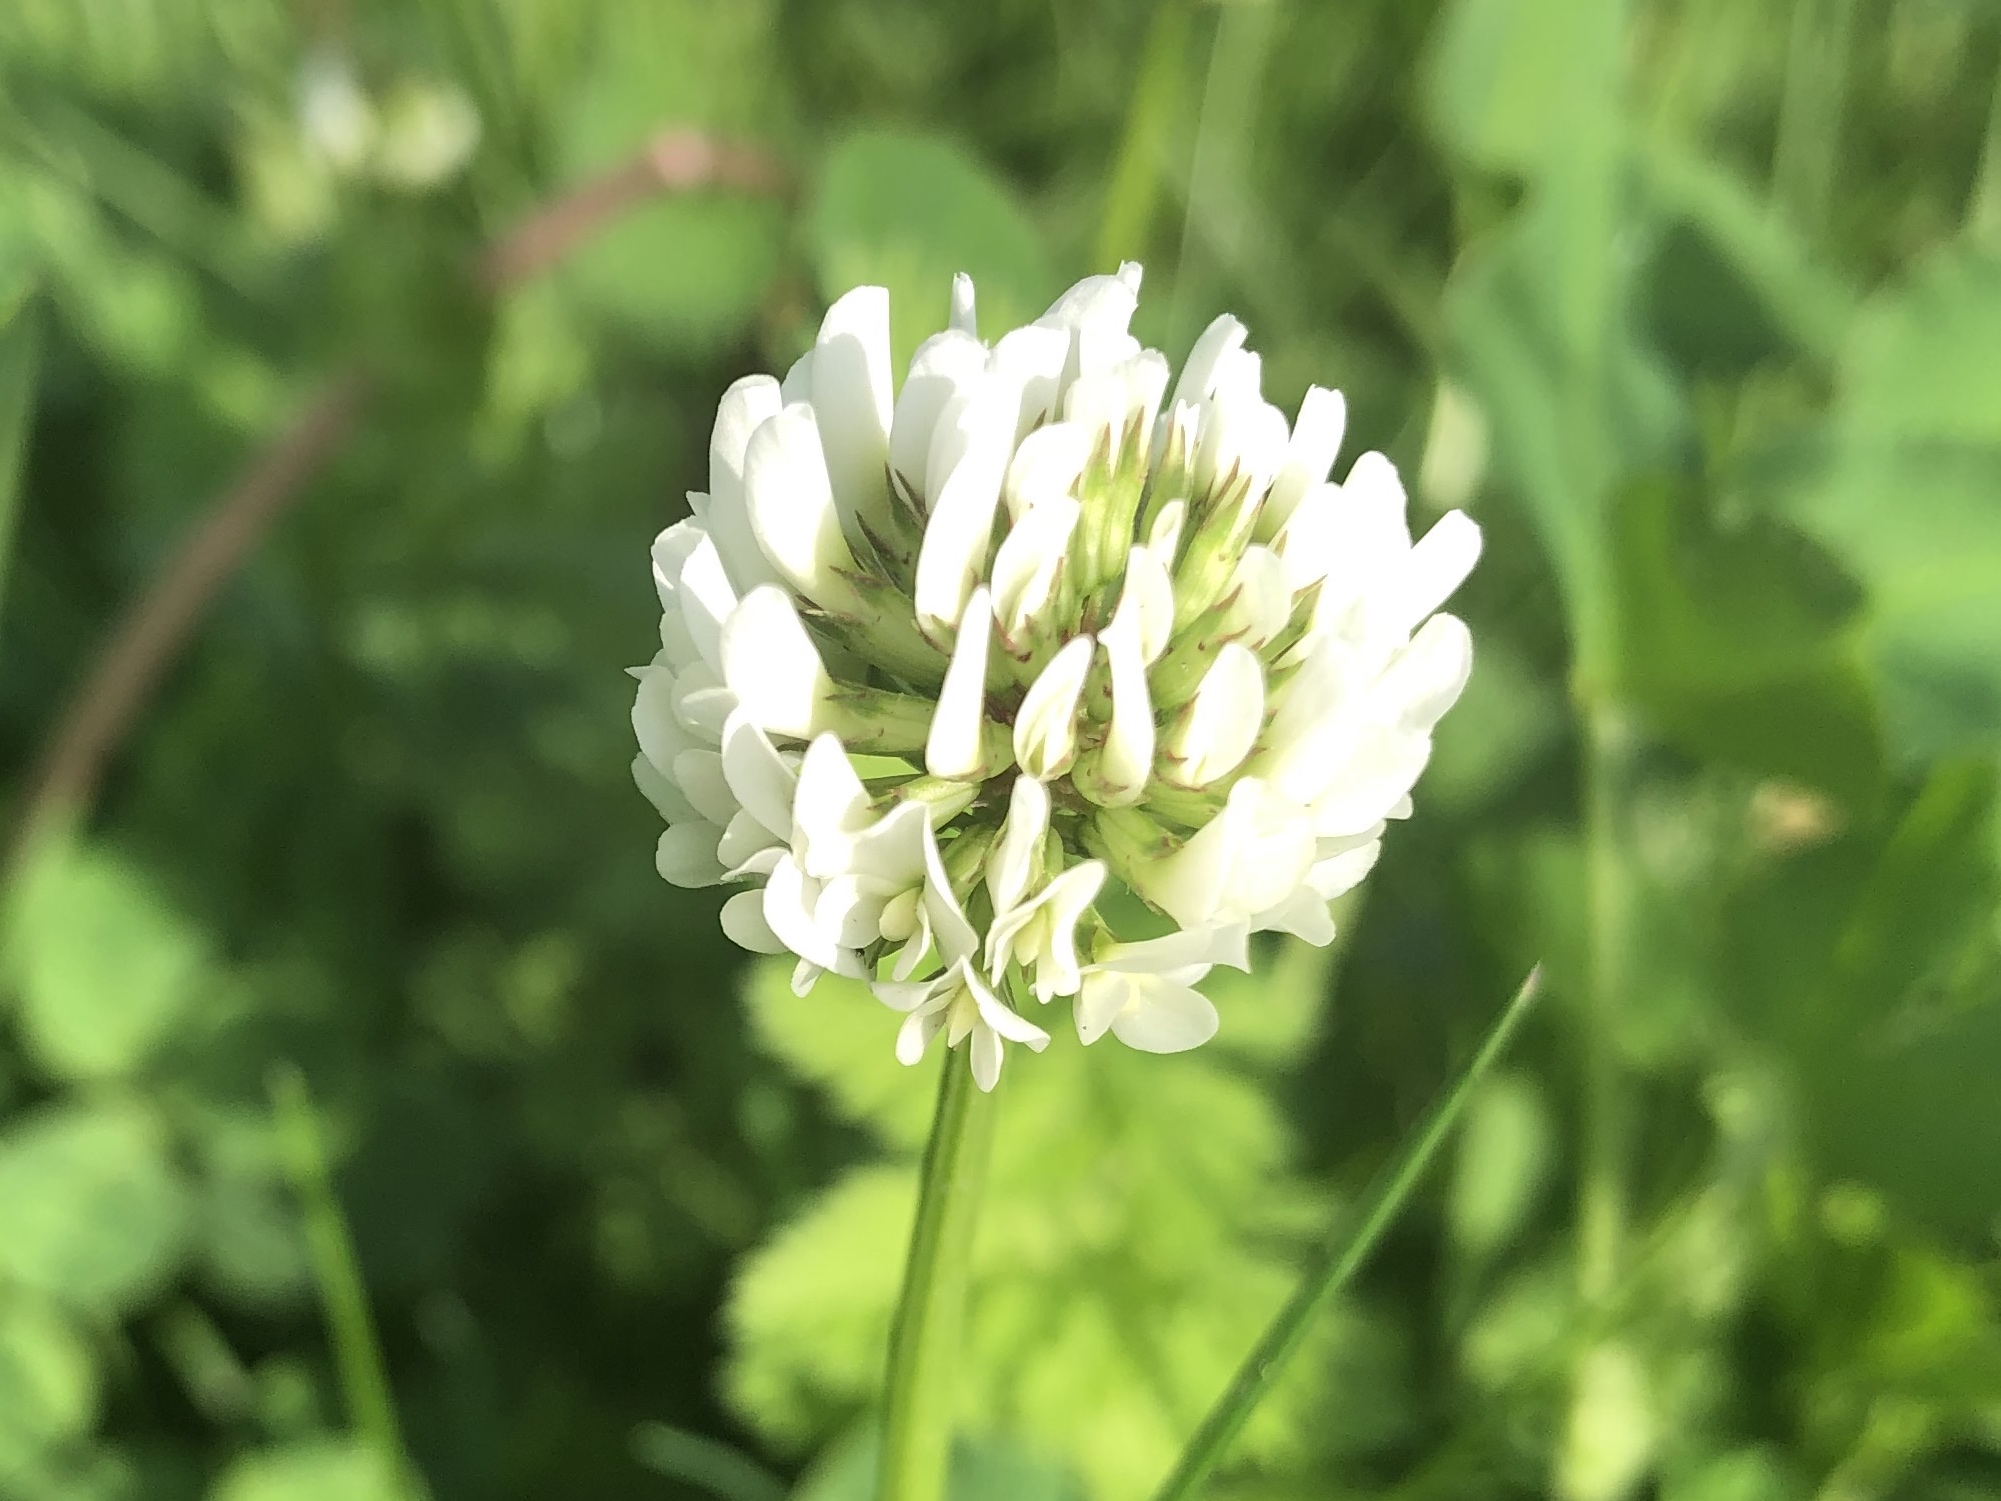 White Clover off of Monroe Street sidewalk in Madison, Wisconsin on May 27, 2020.